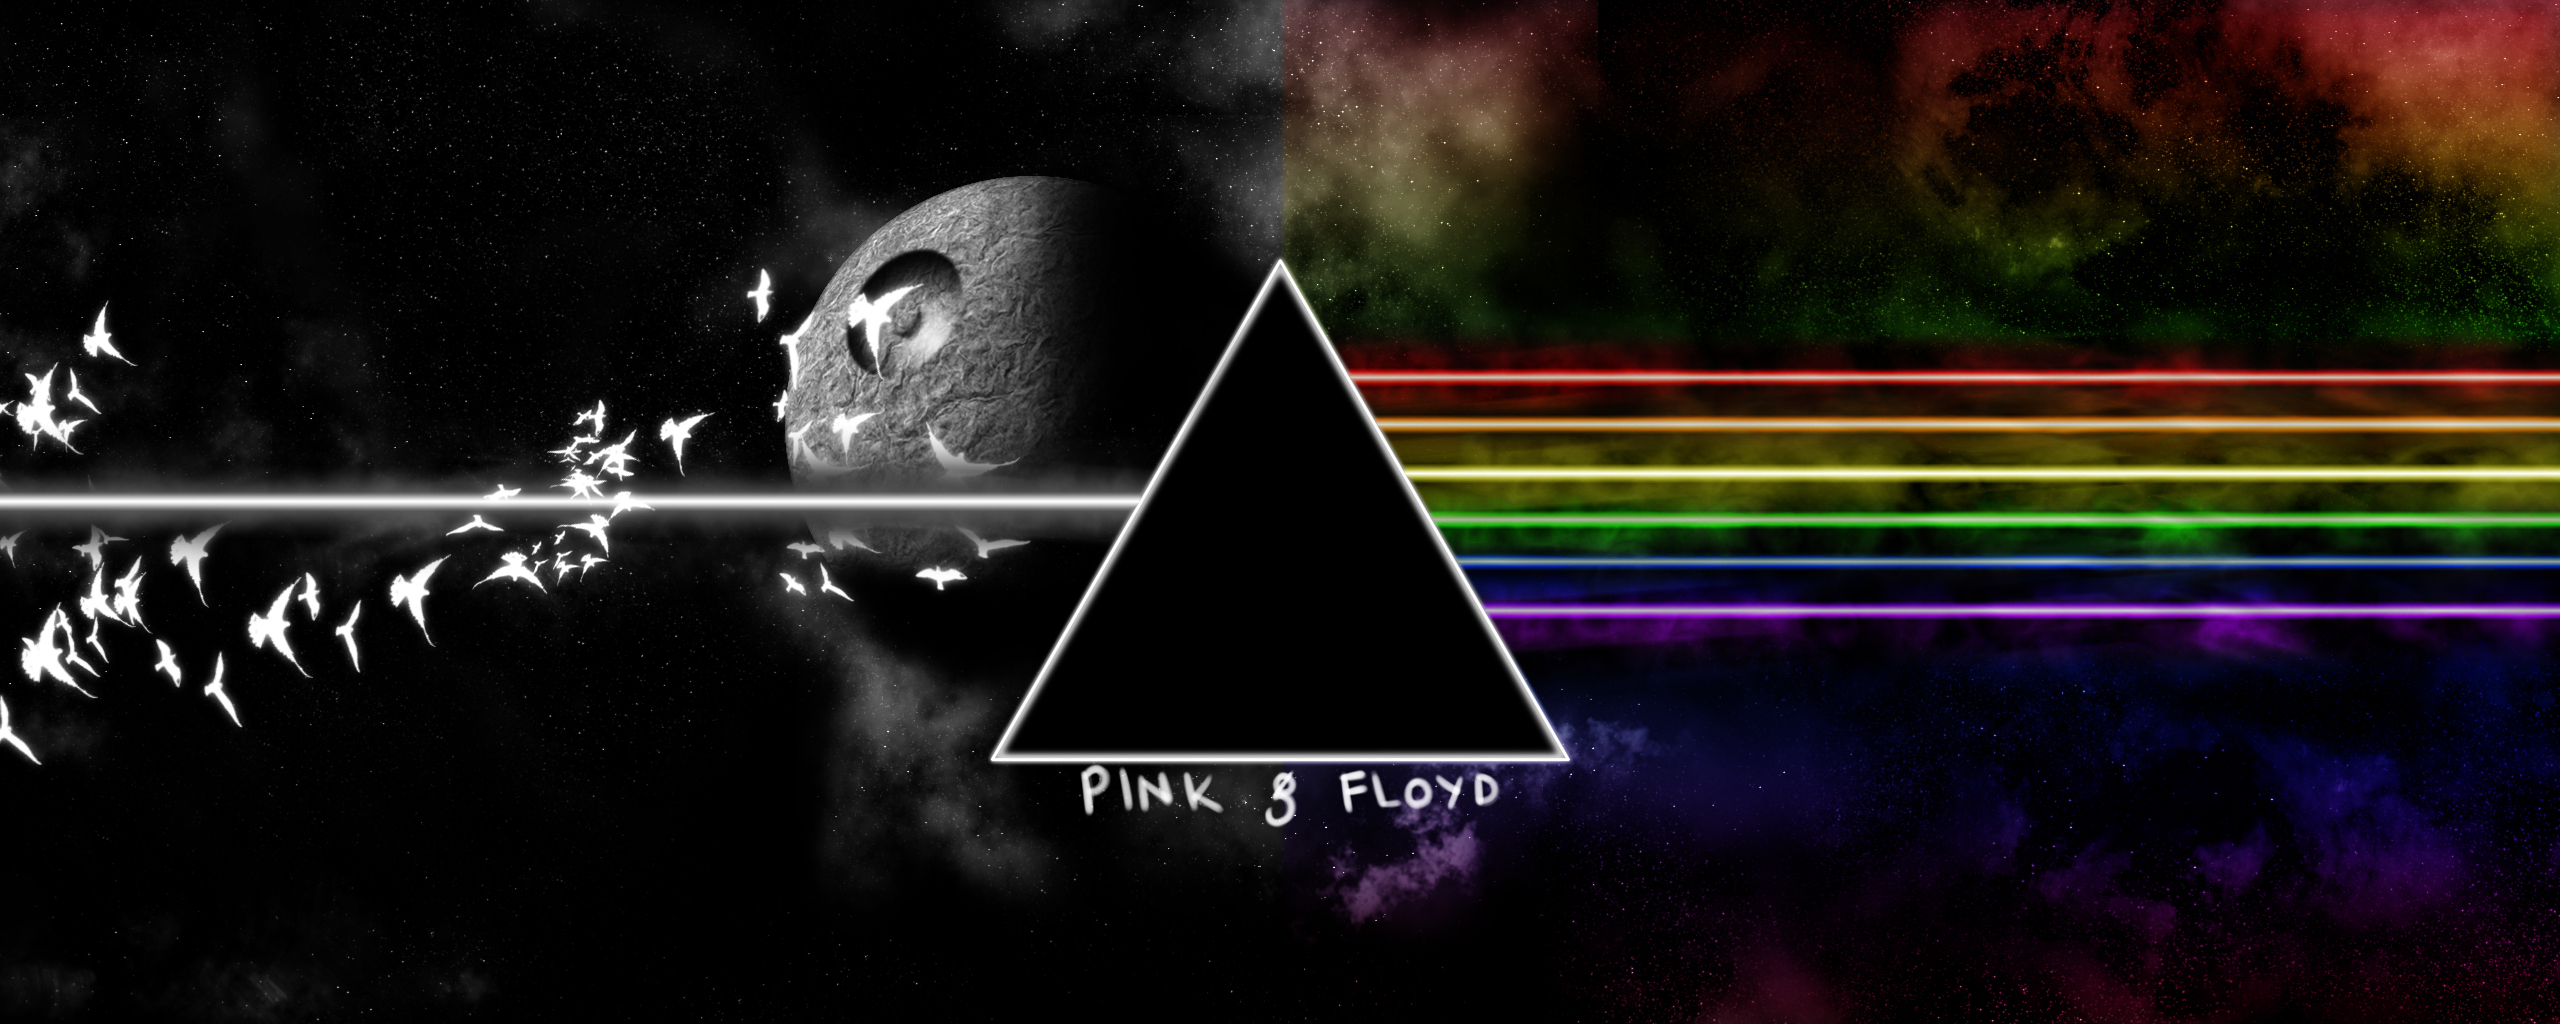 Pink Floyd Wallpaper and Pictures Photo Pink Floyd Wallpaper 93jpg